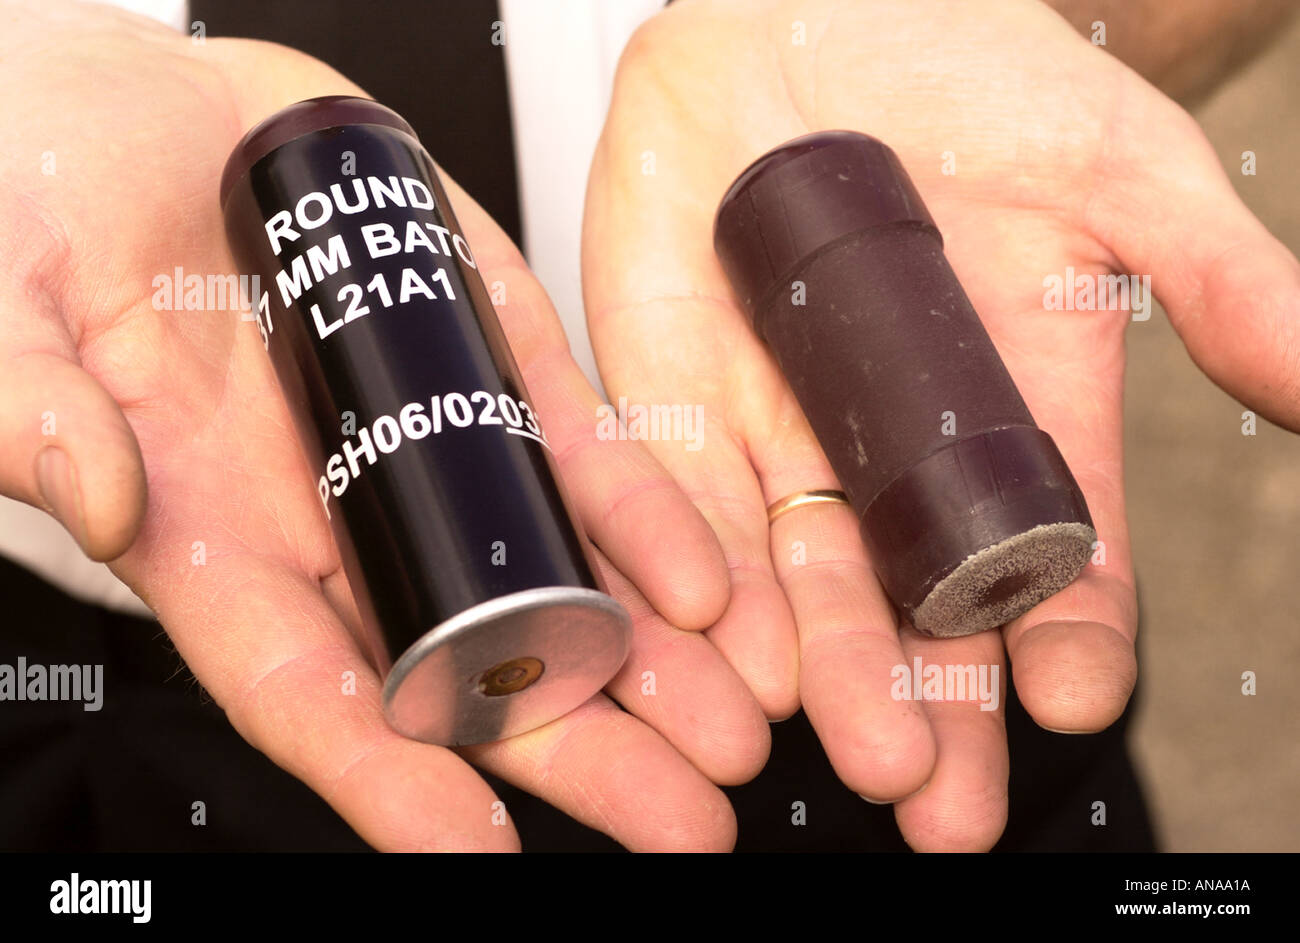 baton-rounds-showing-the-unfired-cartridge-on-the-left-and-the-baton-ANAA1A.jpg